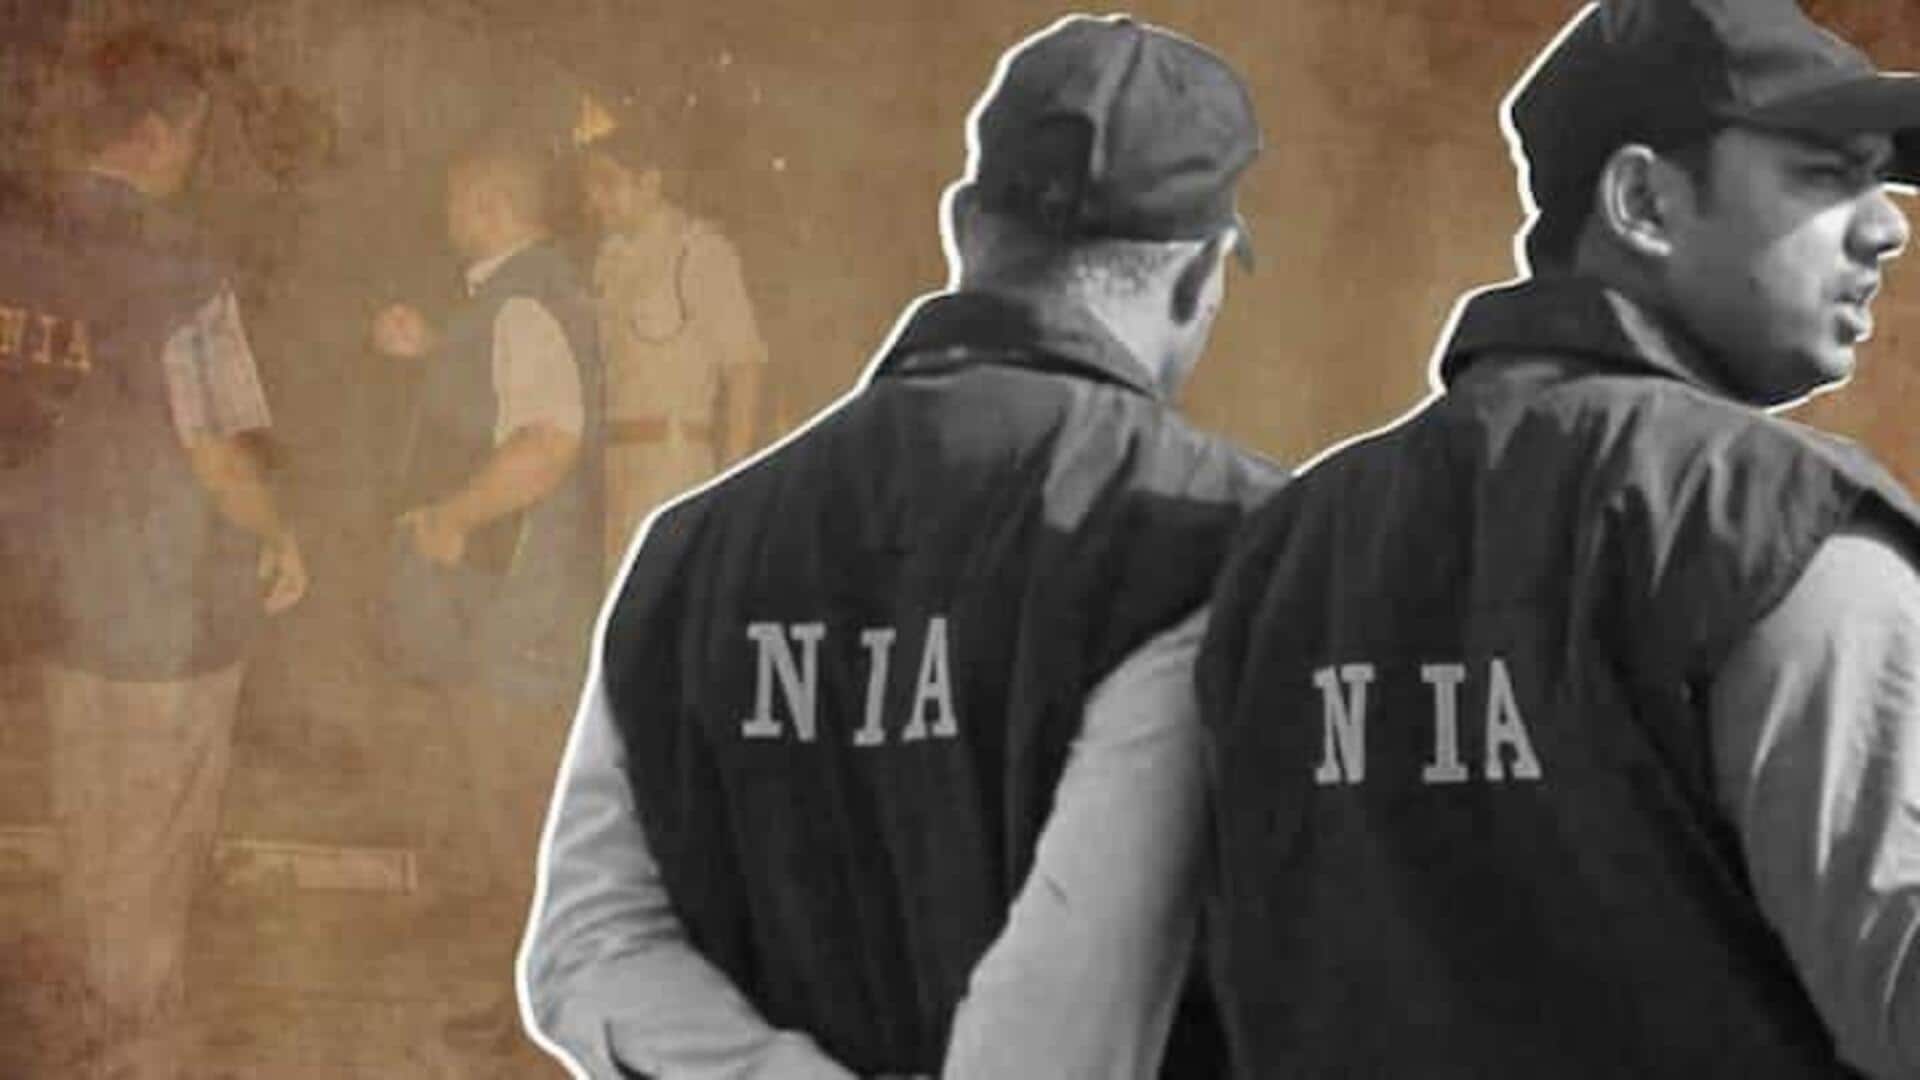 NIA officials who were attacked during raid booked for 'molestation'